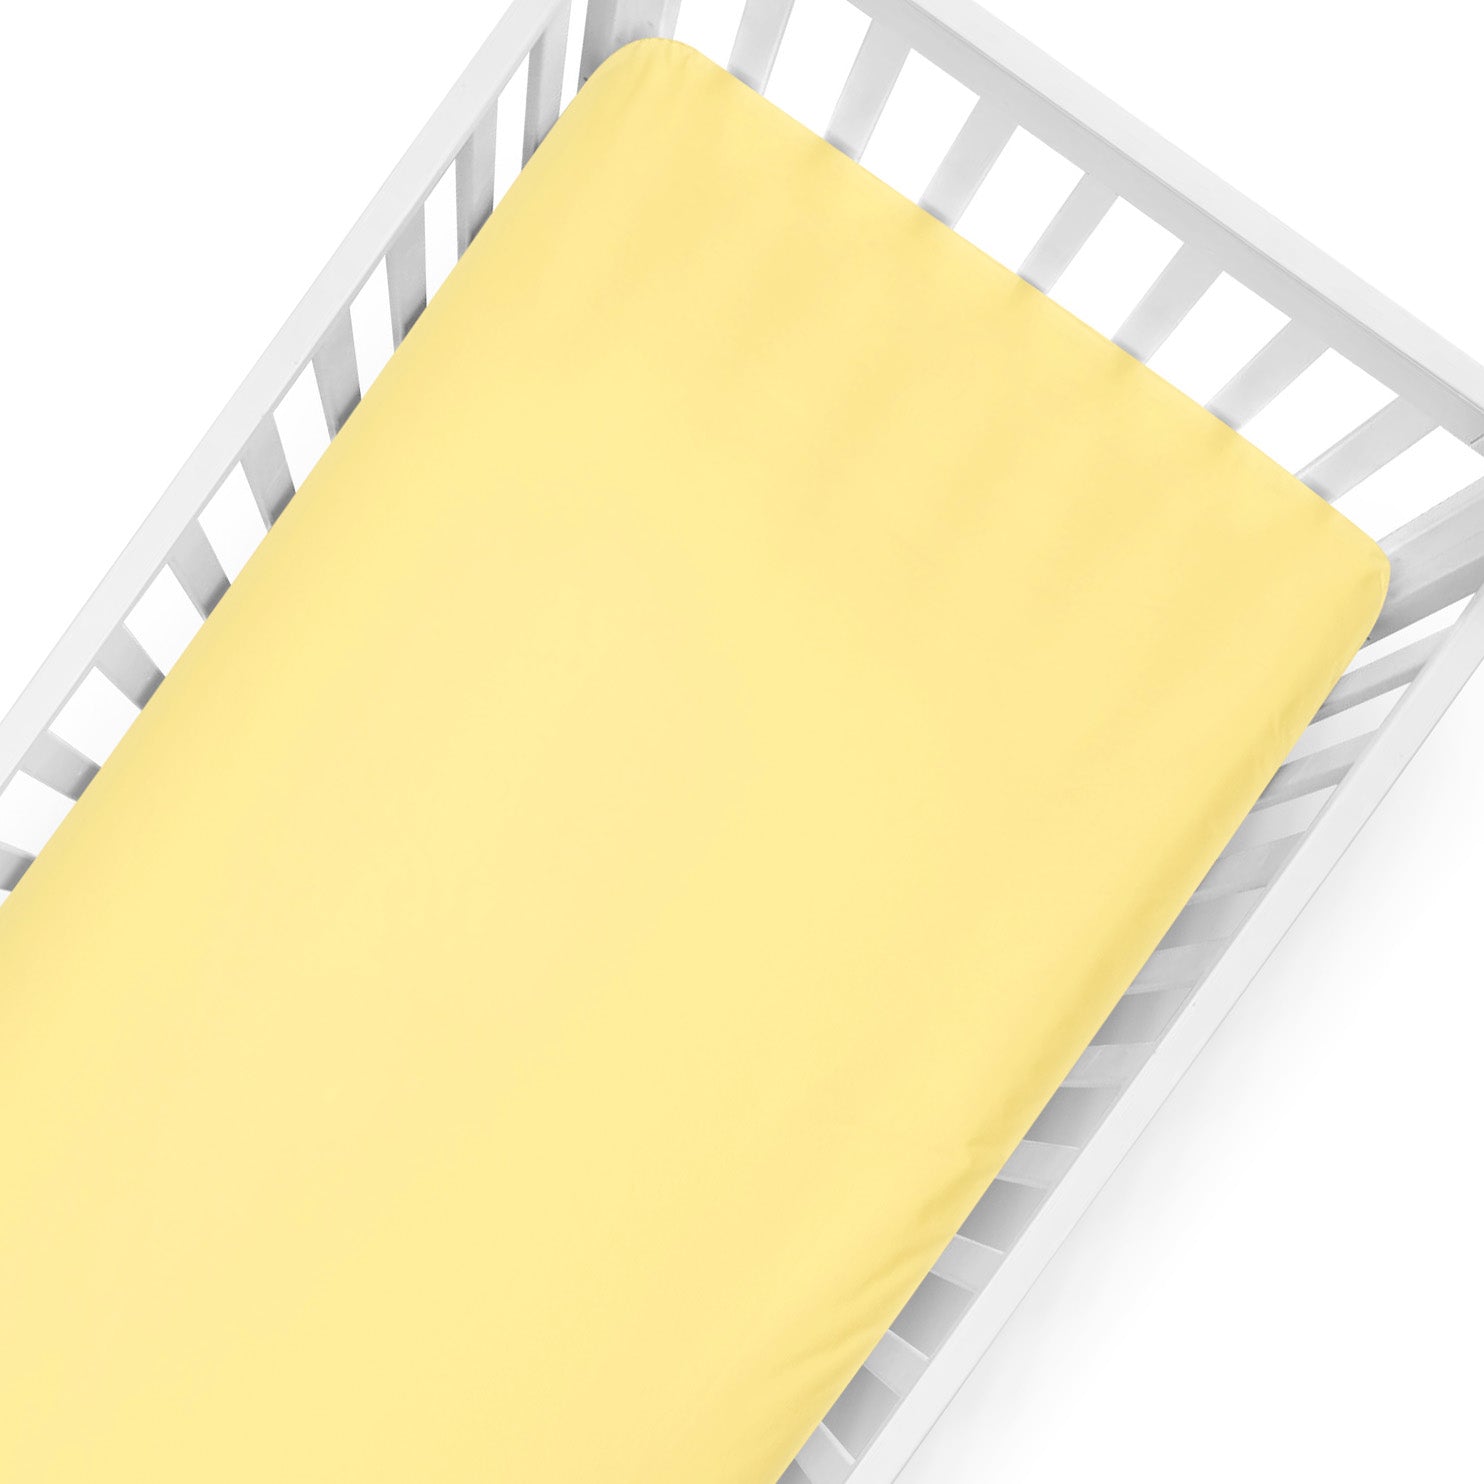 The White Cradle Pure Organic Cotton Flat Sheet for Baby Crib & Cot With Size 71 x 47 inch - Super Soft, Smooth, Absorbent, Twill Fabric for Infants, Newborns, Babies, Toddlers - Yellow